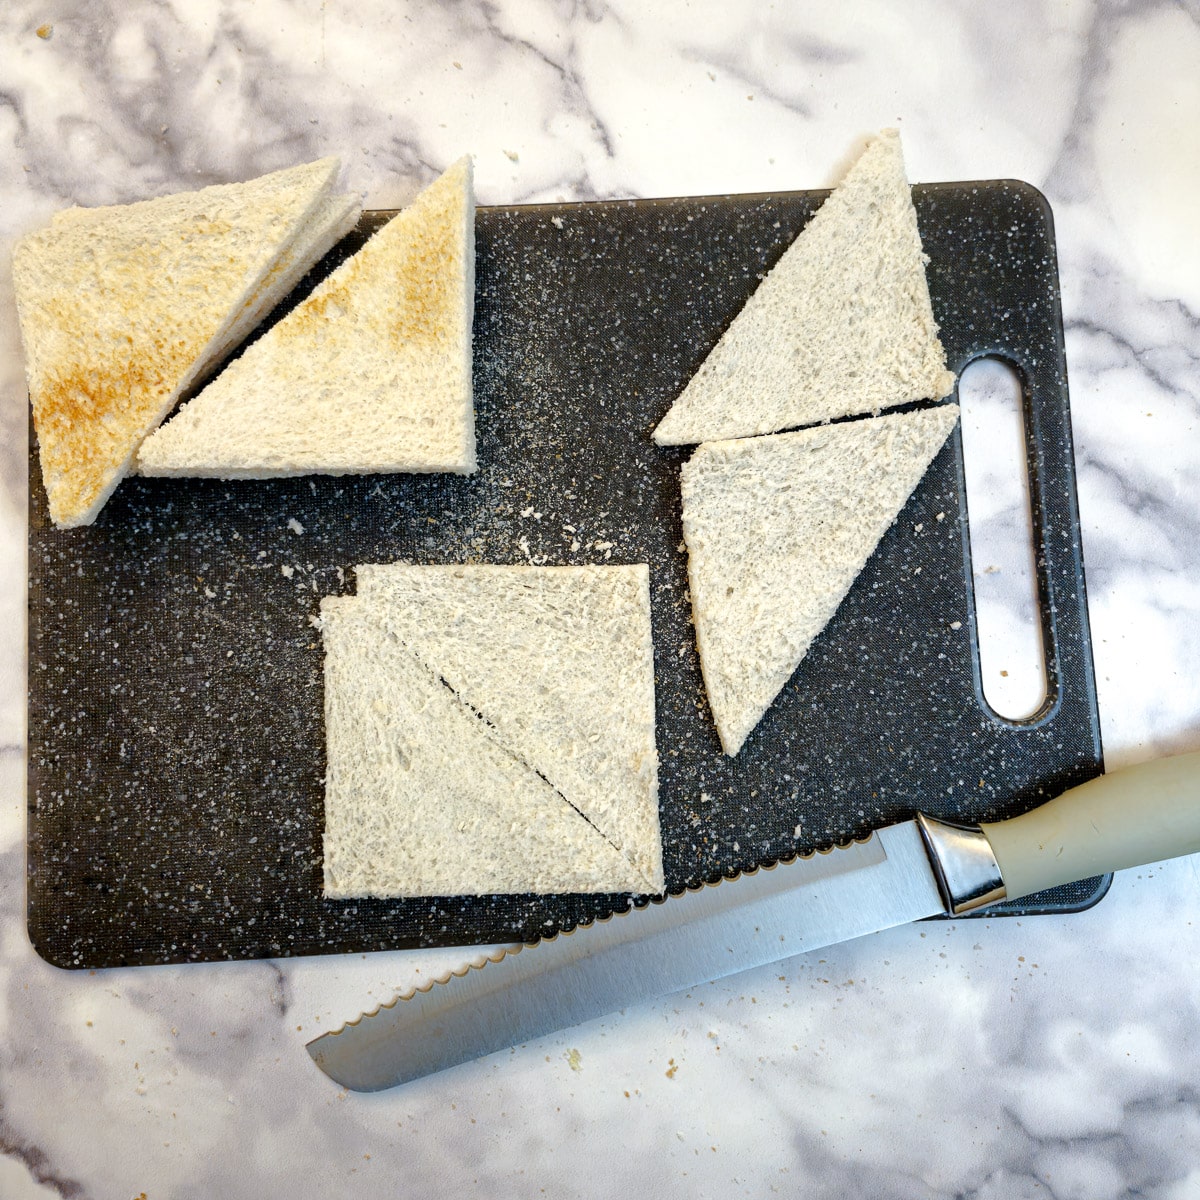 Thinly sliced unbaked melba toast triangles on a chopping board.